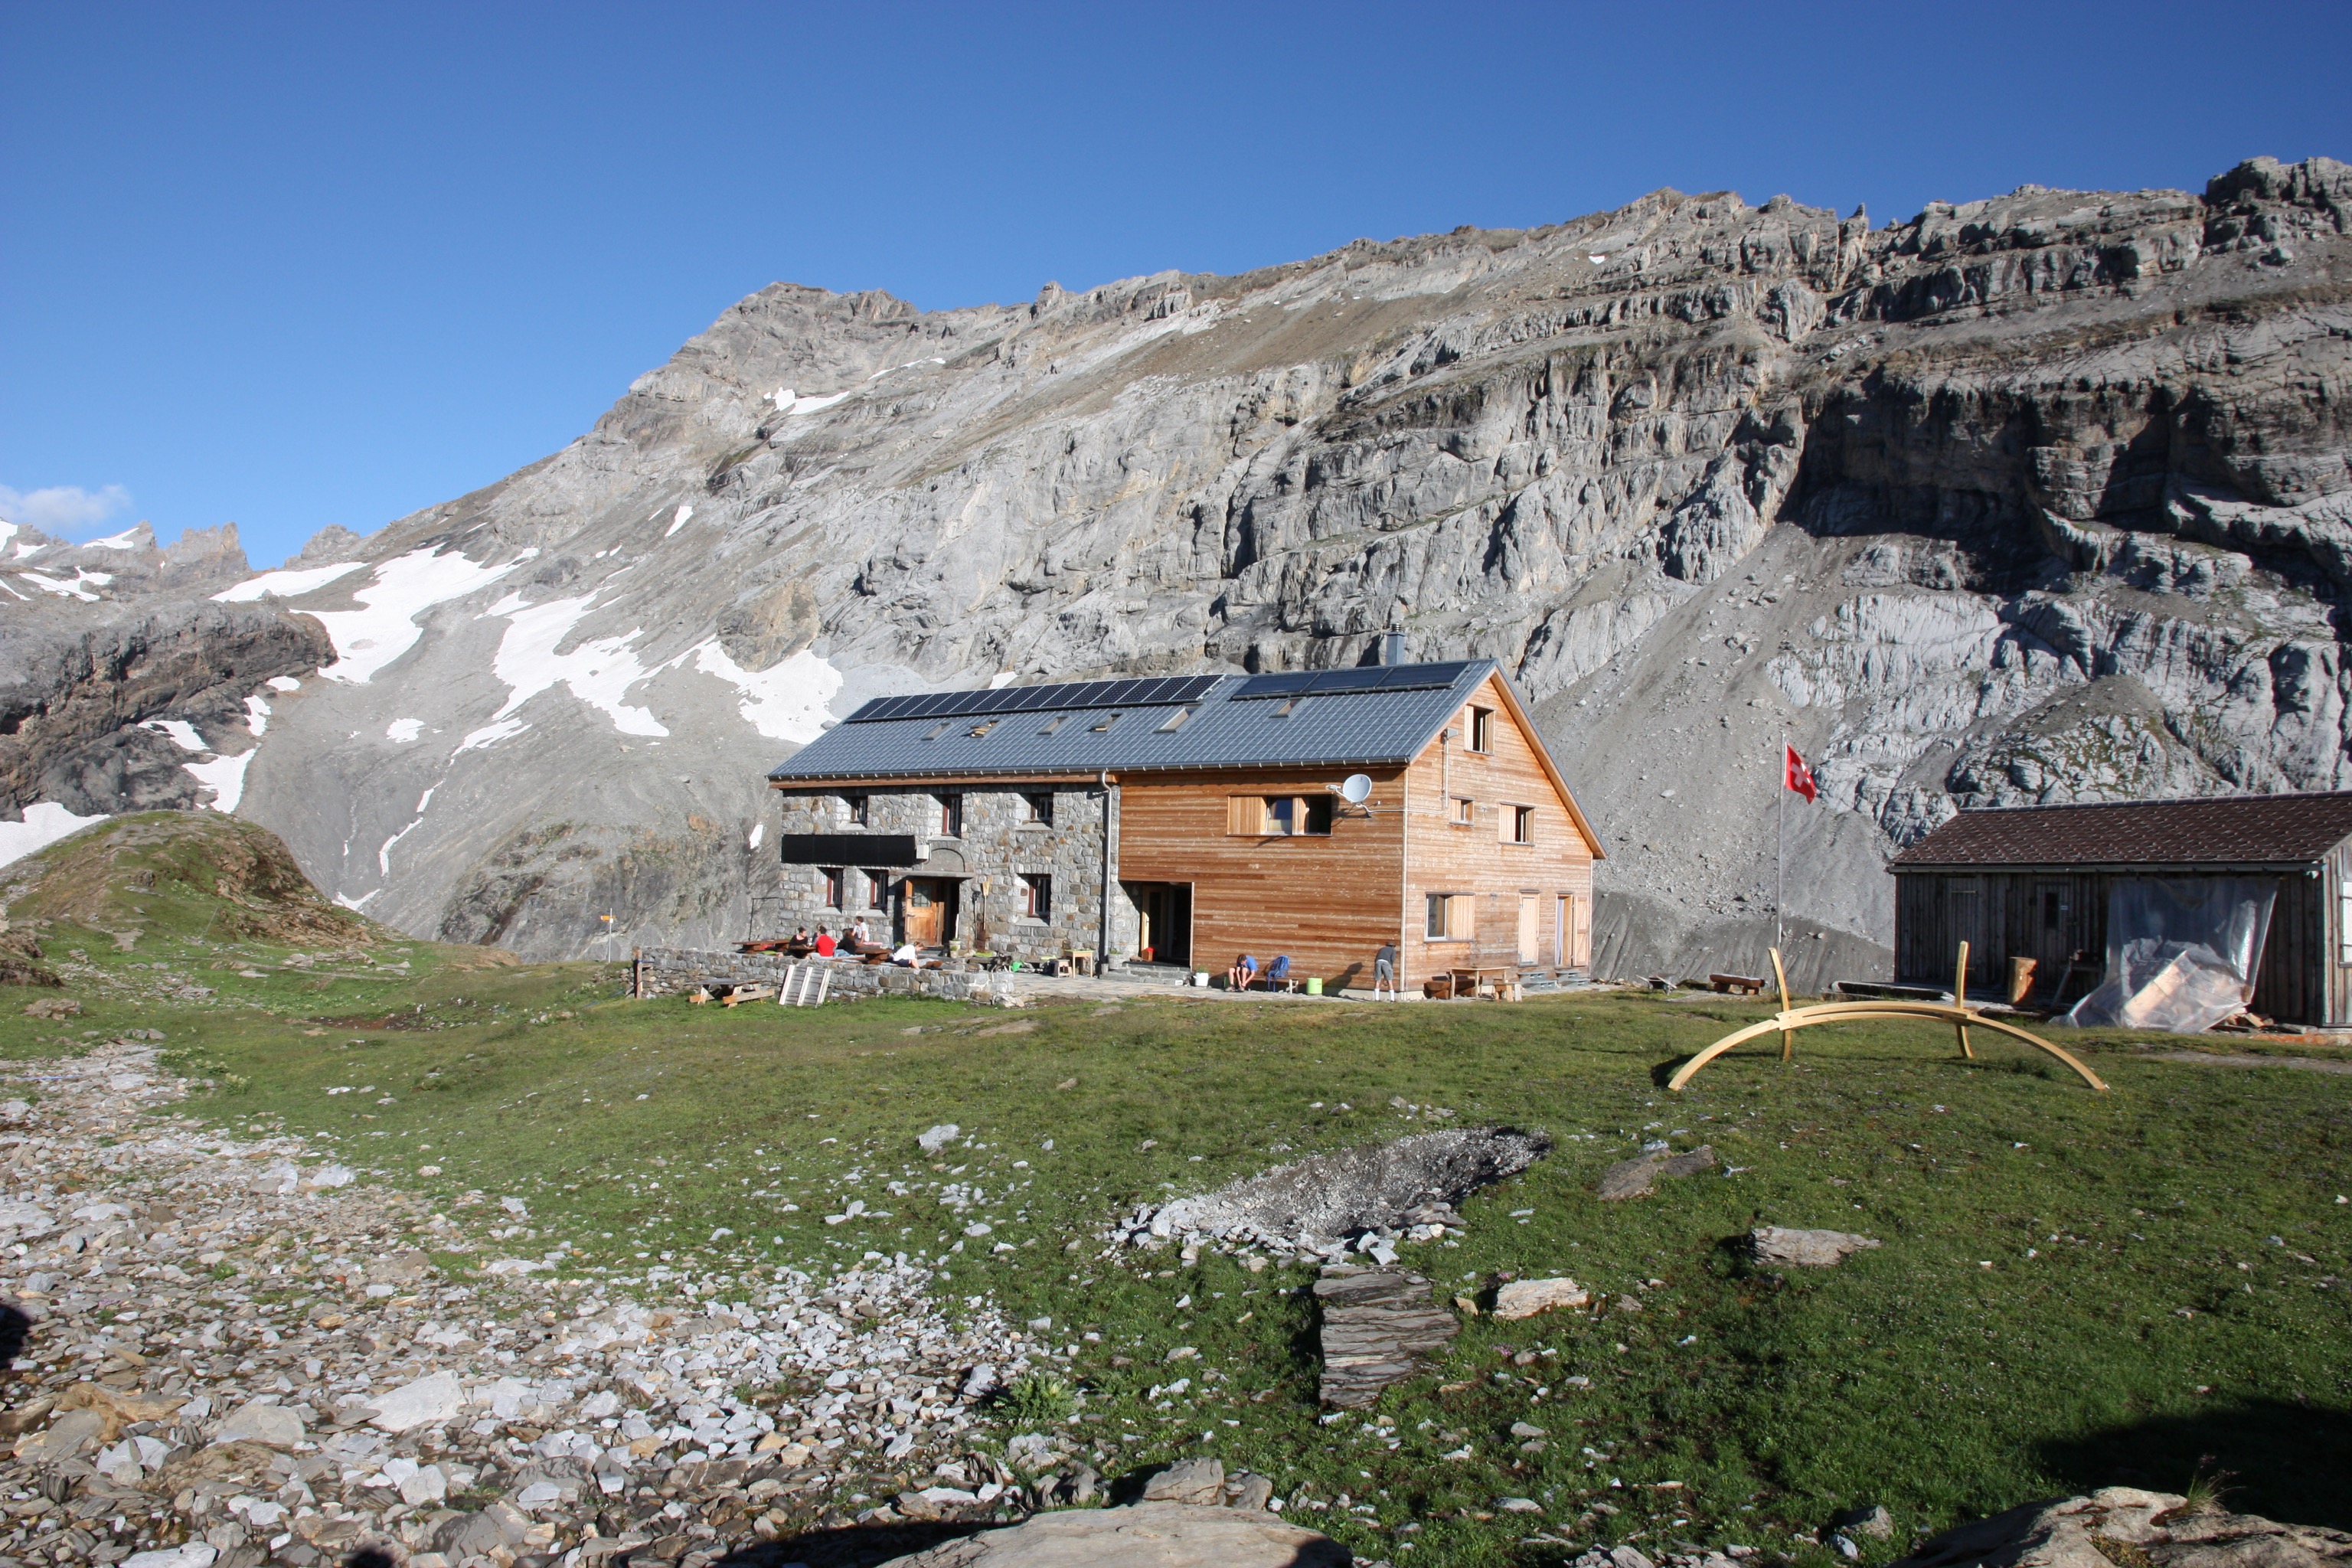 Next morning and it is time to say goodbye to Claridenhütte.